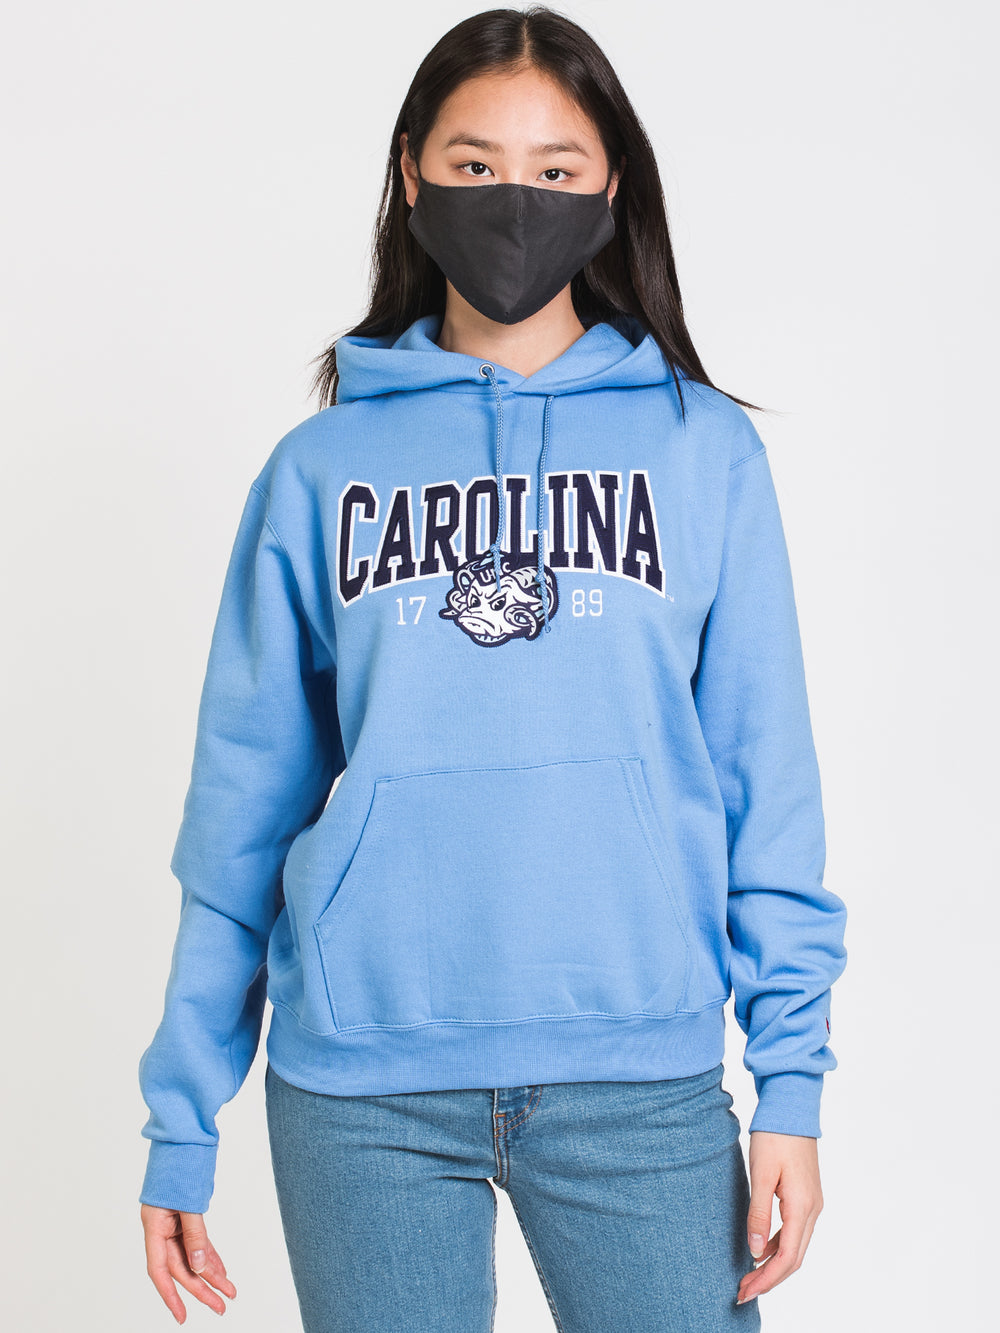 CHAMPION ECO POWERBLEND UNIVERITY OF NORTH CAROLINA HOODIE - CLEARANCE